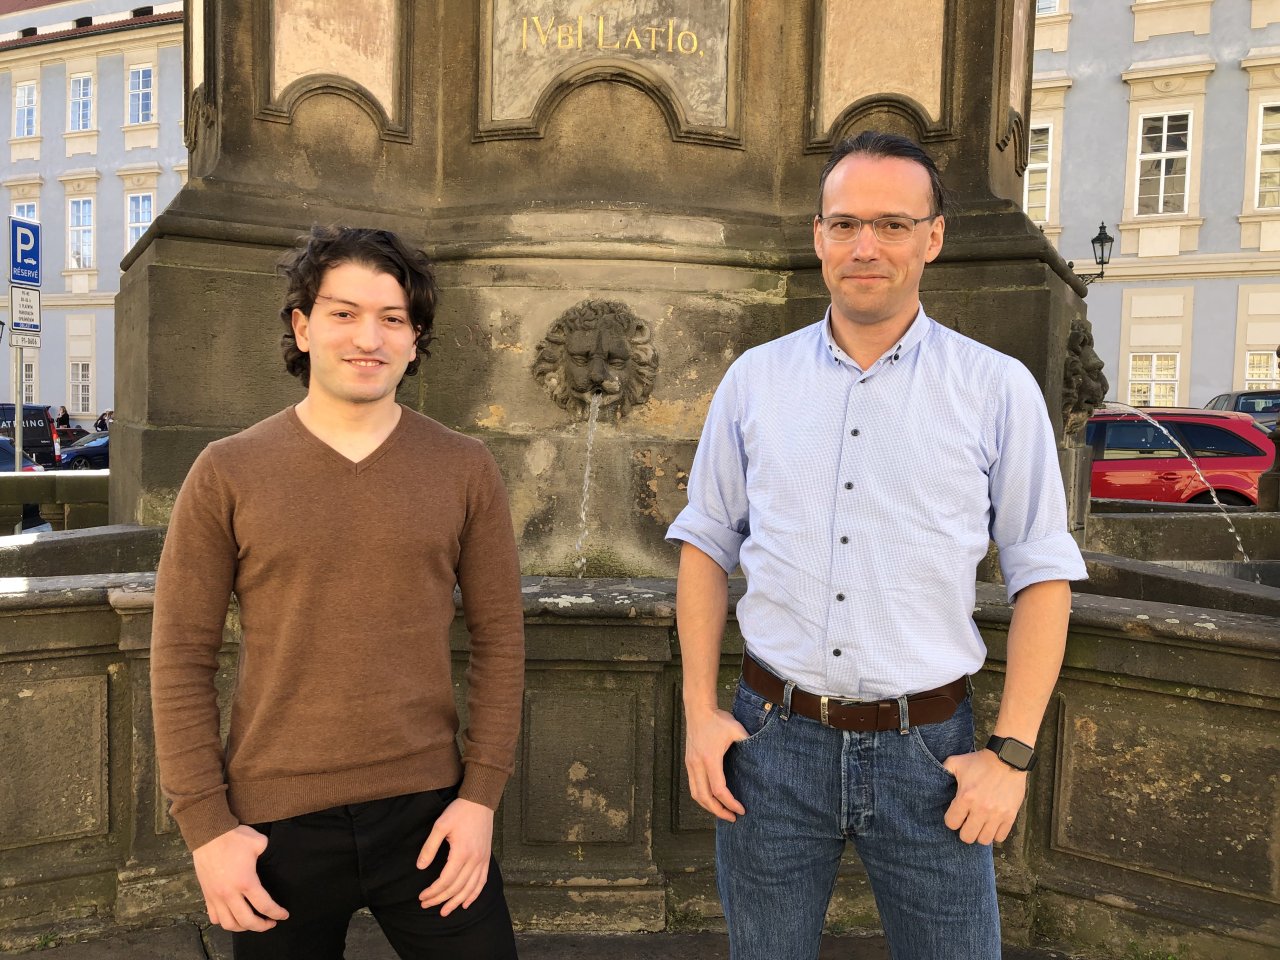 The project lead A. Wilkie (on the right) and the new team member M. Hafidi near the Matfyz builing in Prague